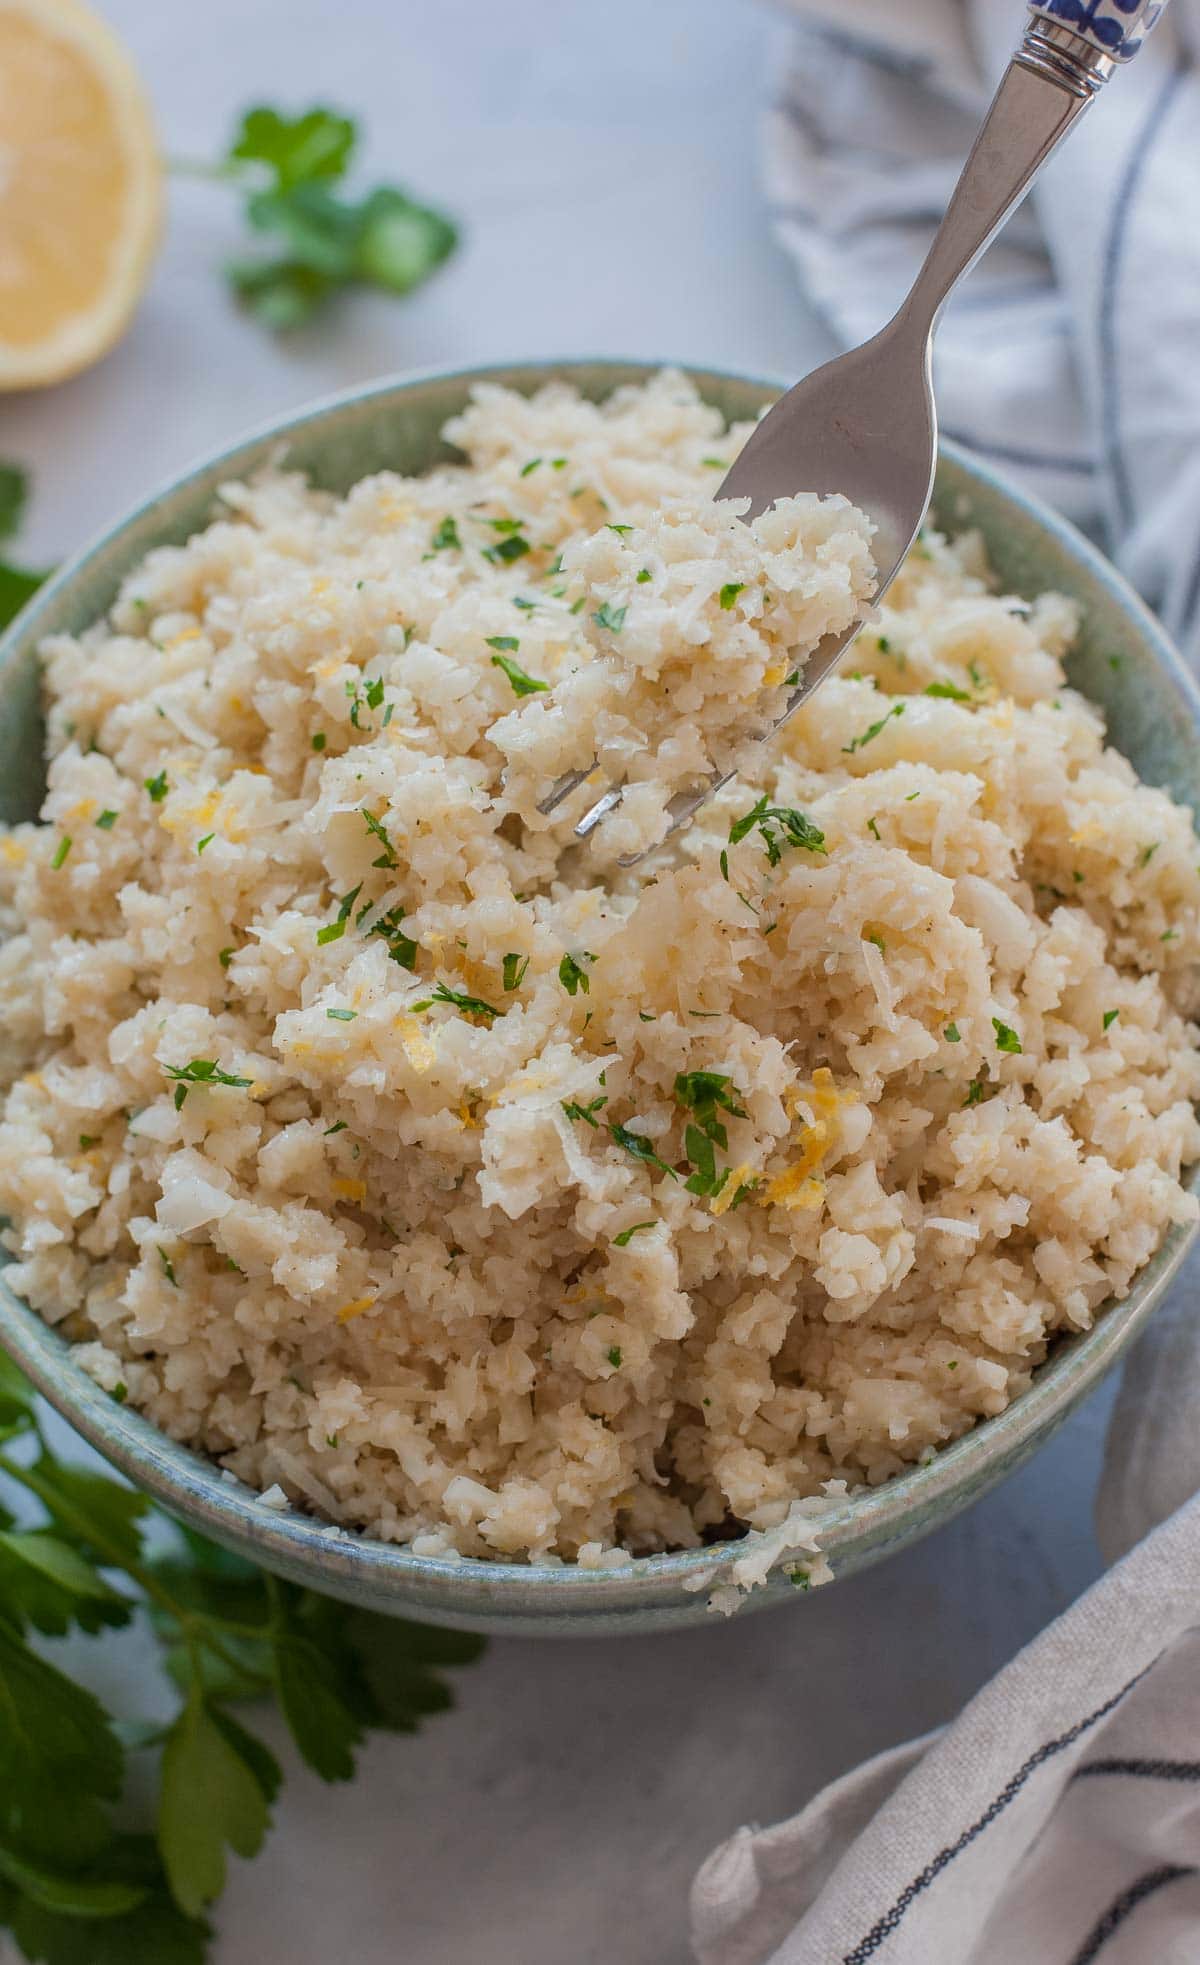 Parmesan cauliflower rice in a green bowl is being picked with a fork.